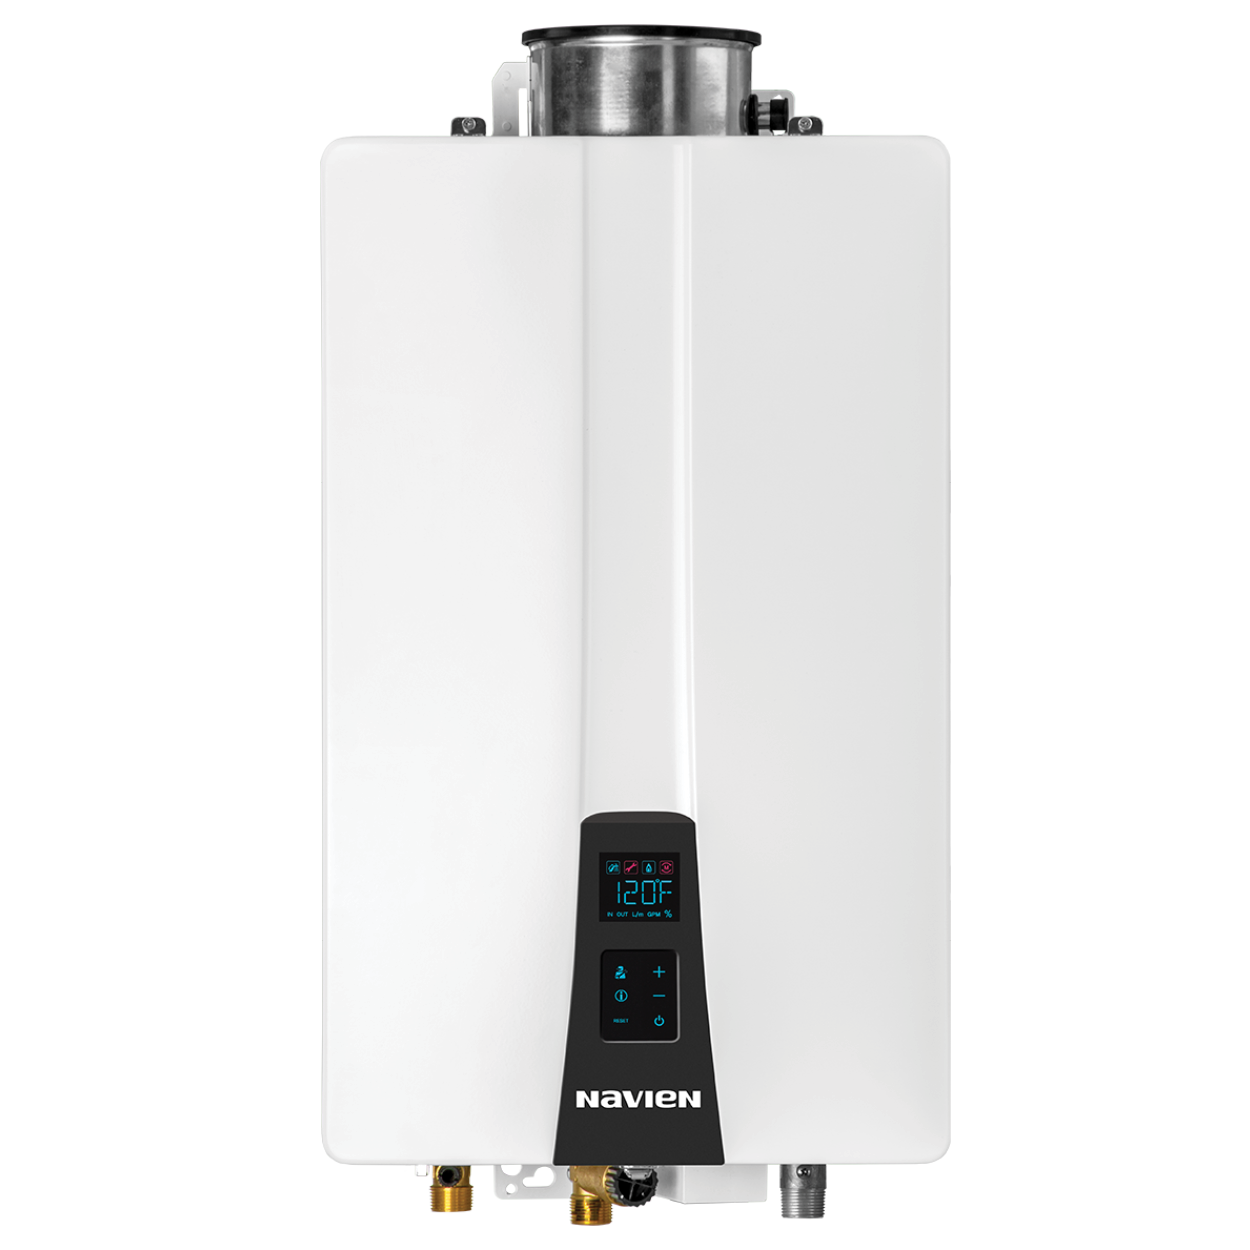 Save on a Tankless Water Heater Tankless Water Heater Cold Water Sandwich